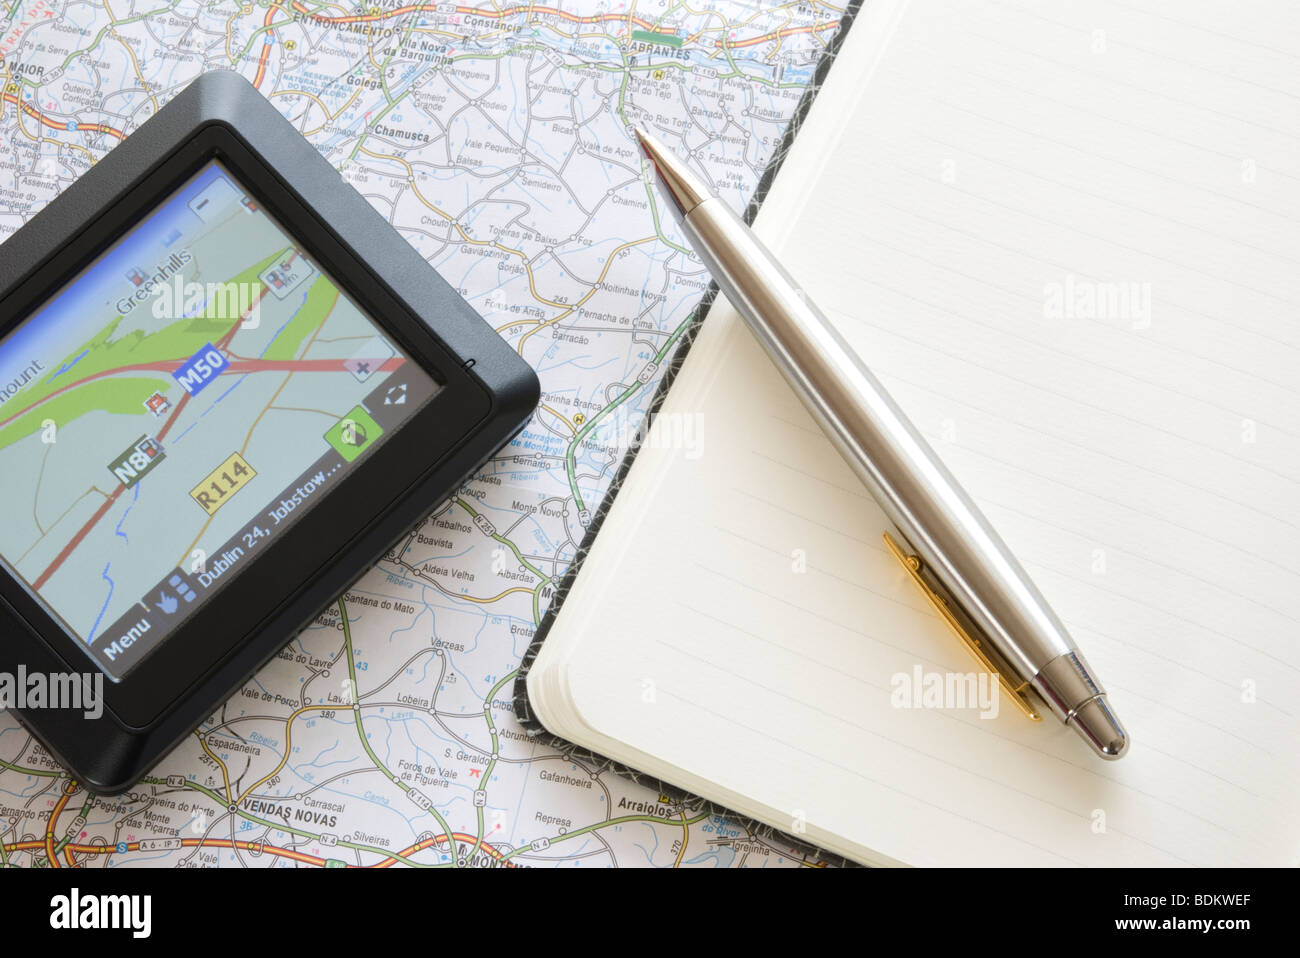 GPS global positioning system device arranged with map Stock Photo